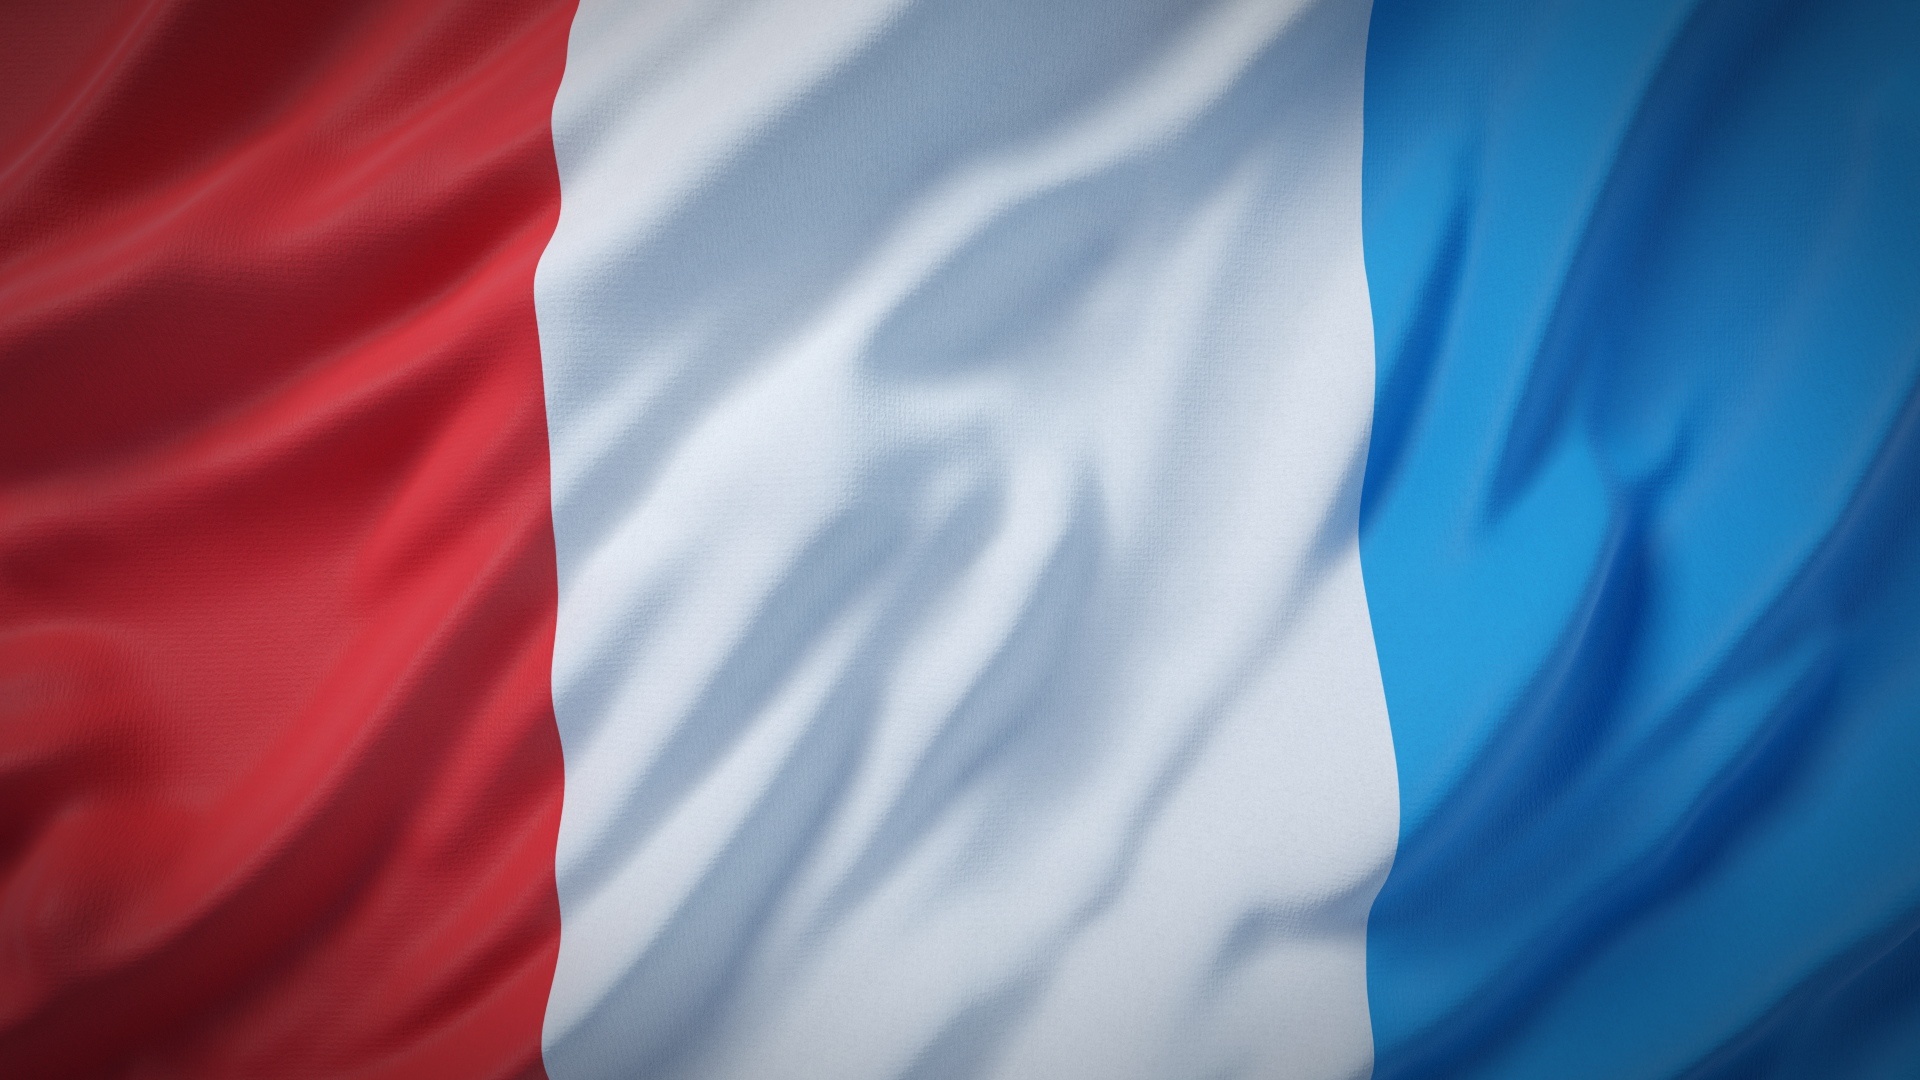 Wallpapers France Europe red on the desktop